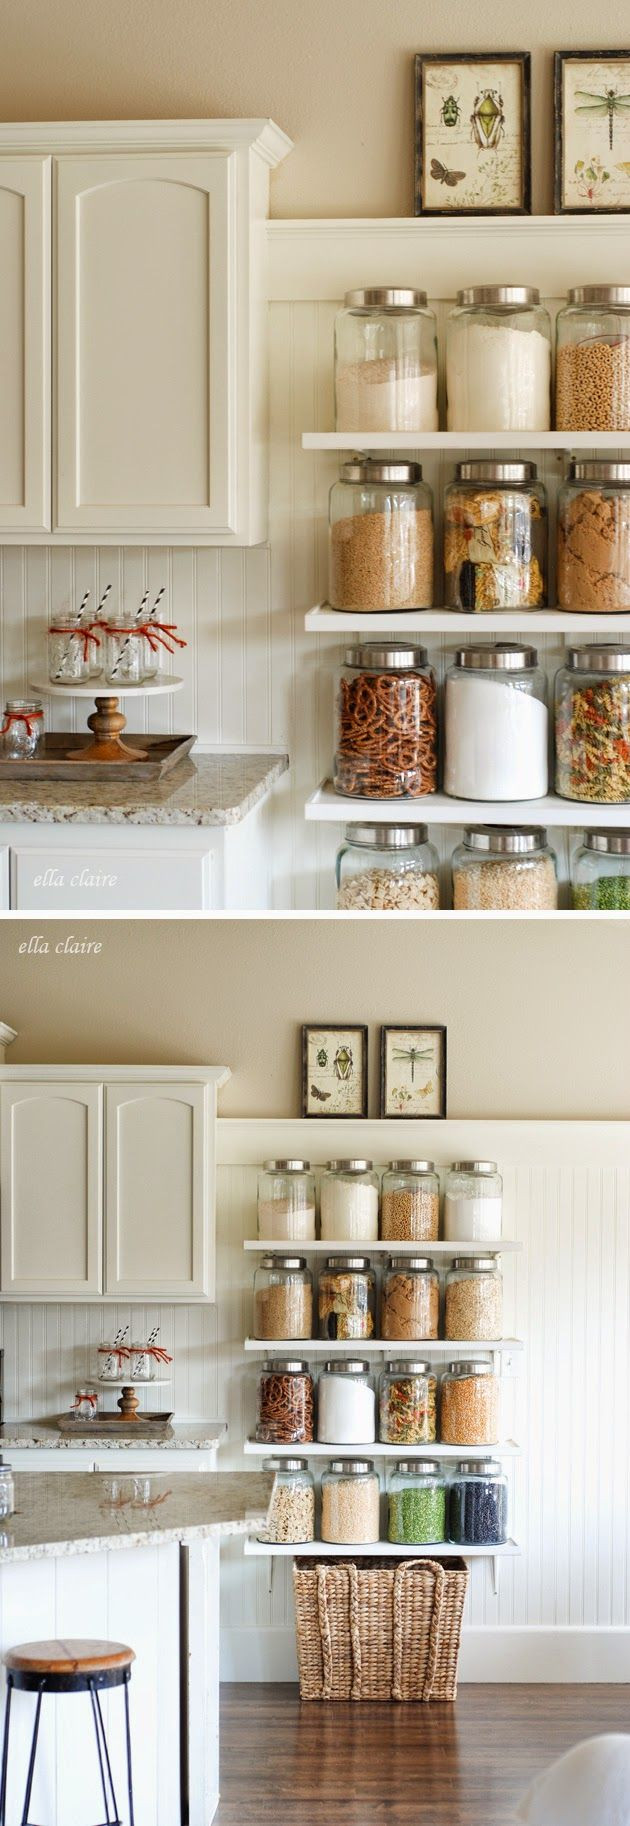 DIY Kitchen Decor
 30 Crazily Simple DIY Tips To Improve Your Kitchen